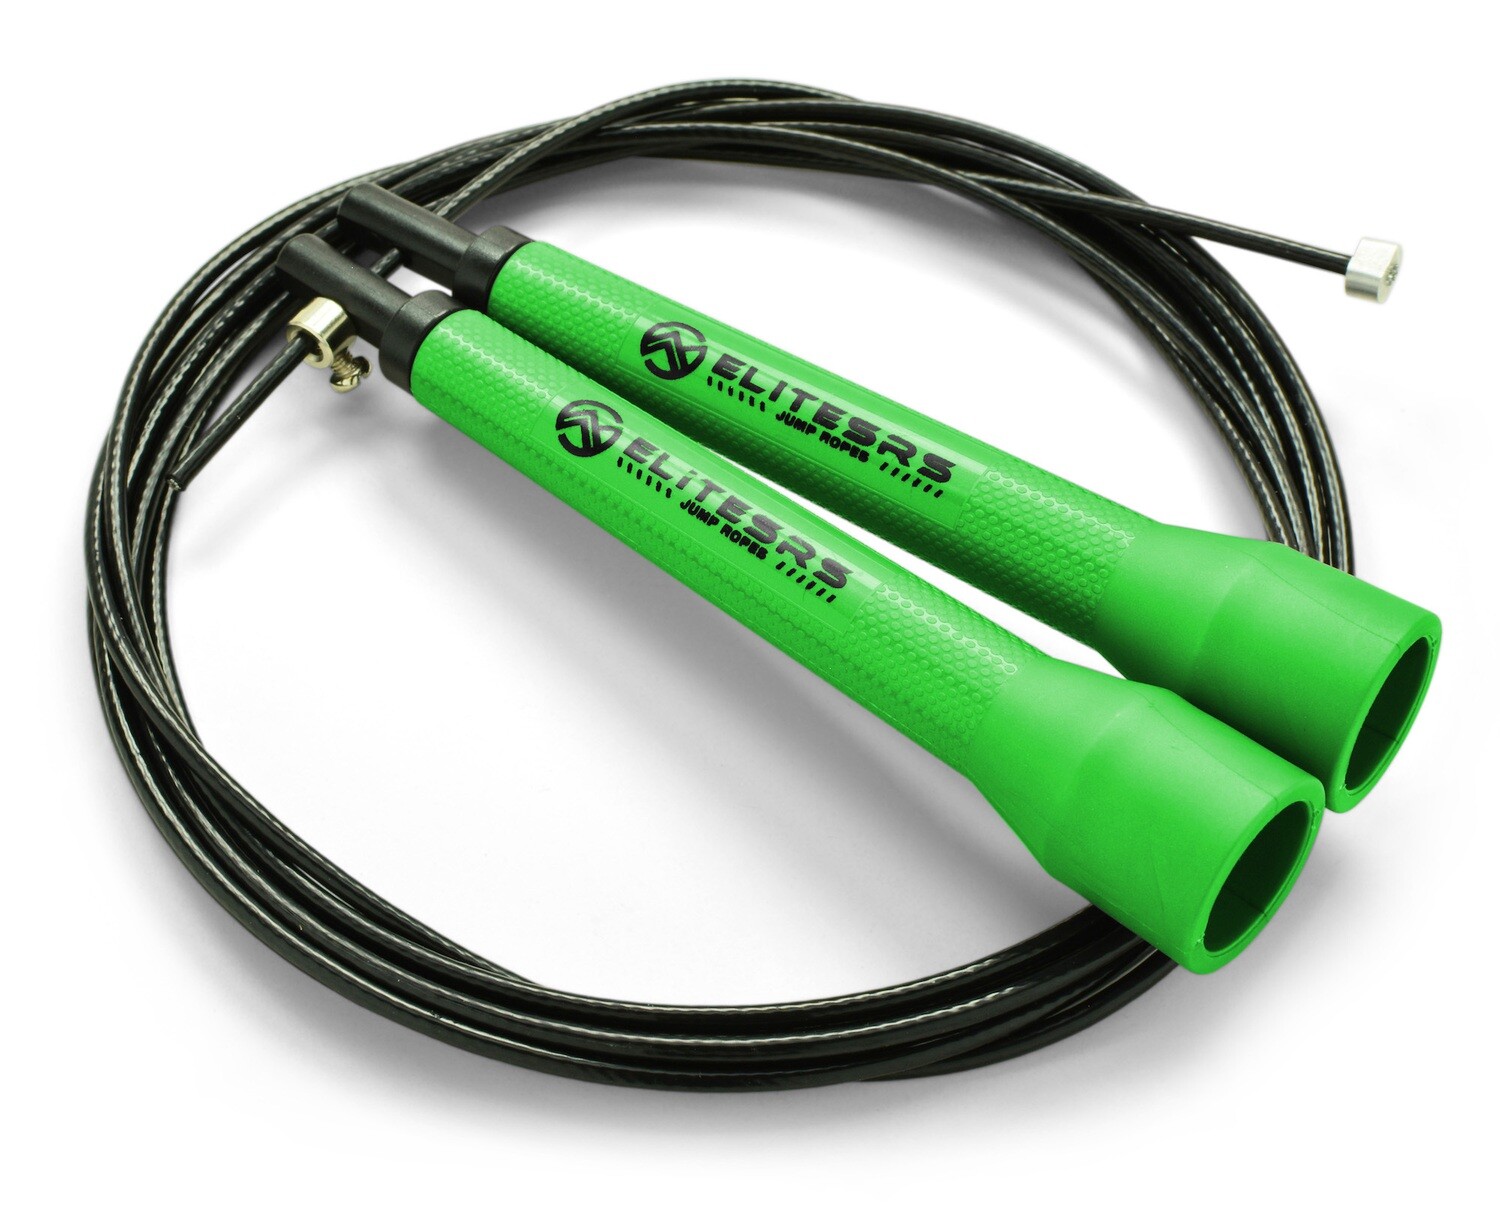 Ultra Light 3.0 Jump Rope - Electric Green (NEW!)